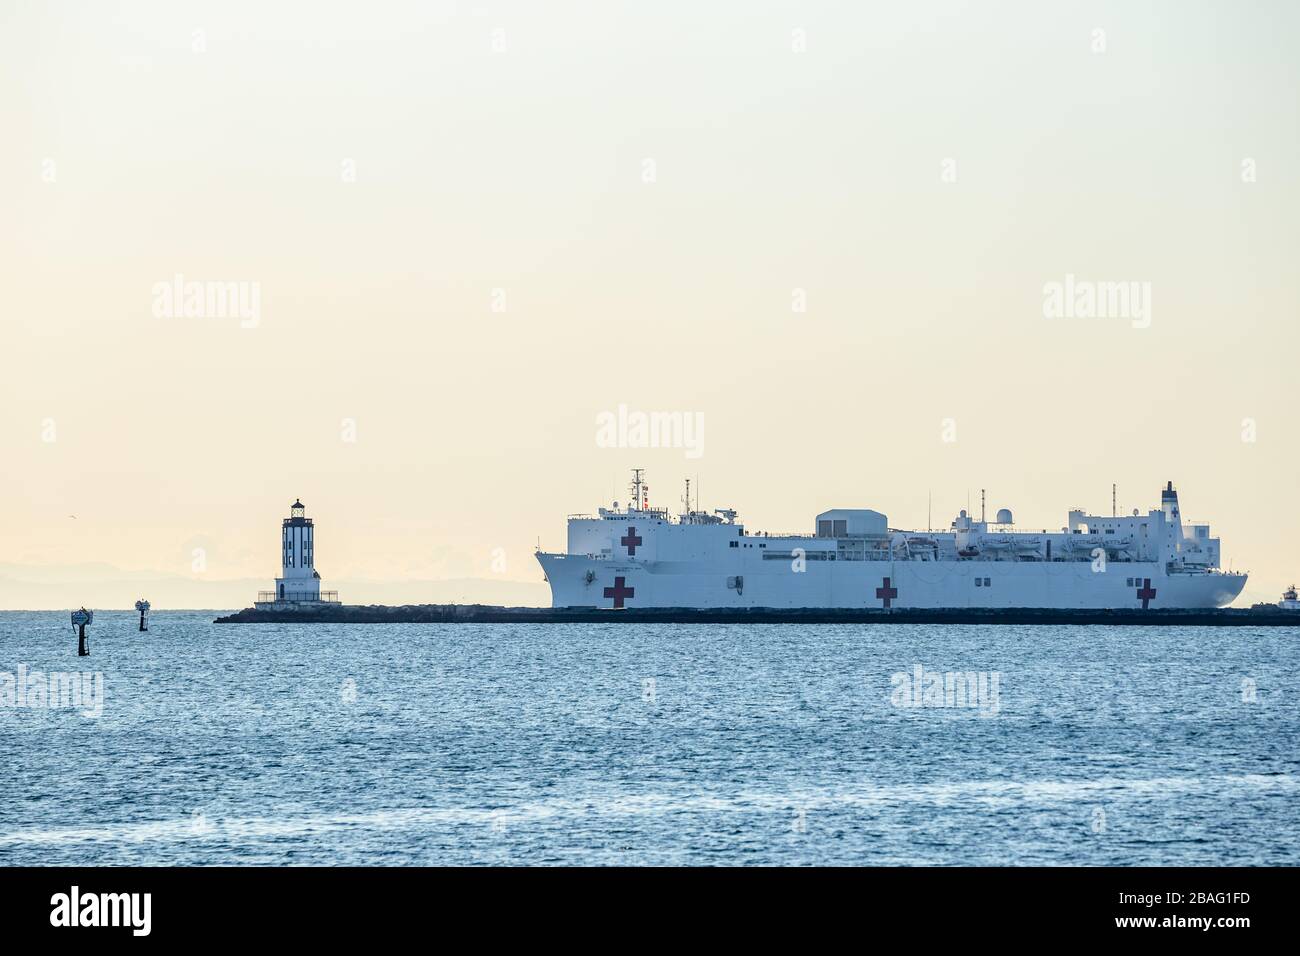 USNS Mercy navy hospital ship arrives at Port of Los Angeles in San Pedro, CA March 27, 2020 during Covid-19 crisis Stock Photo